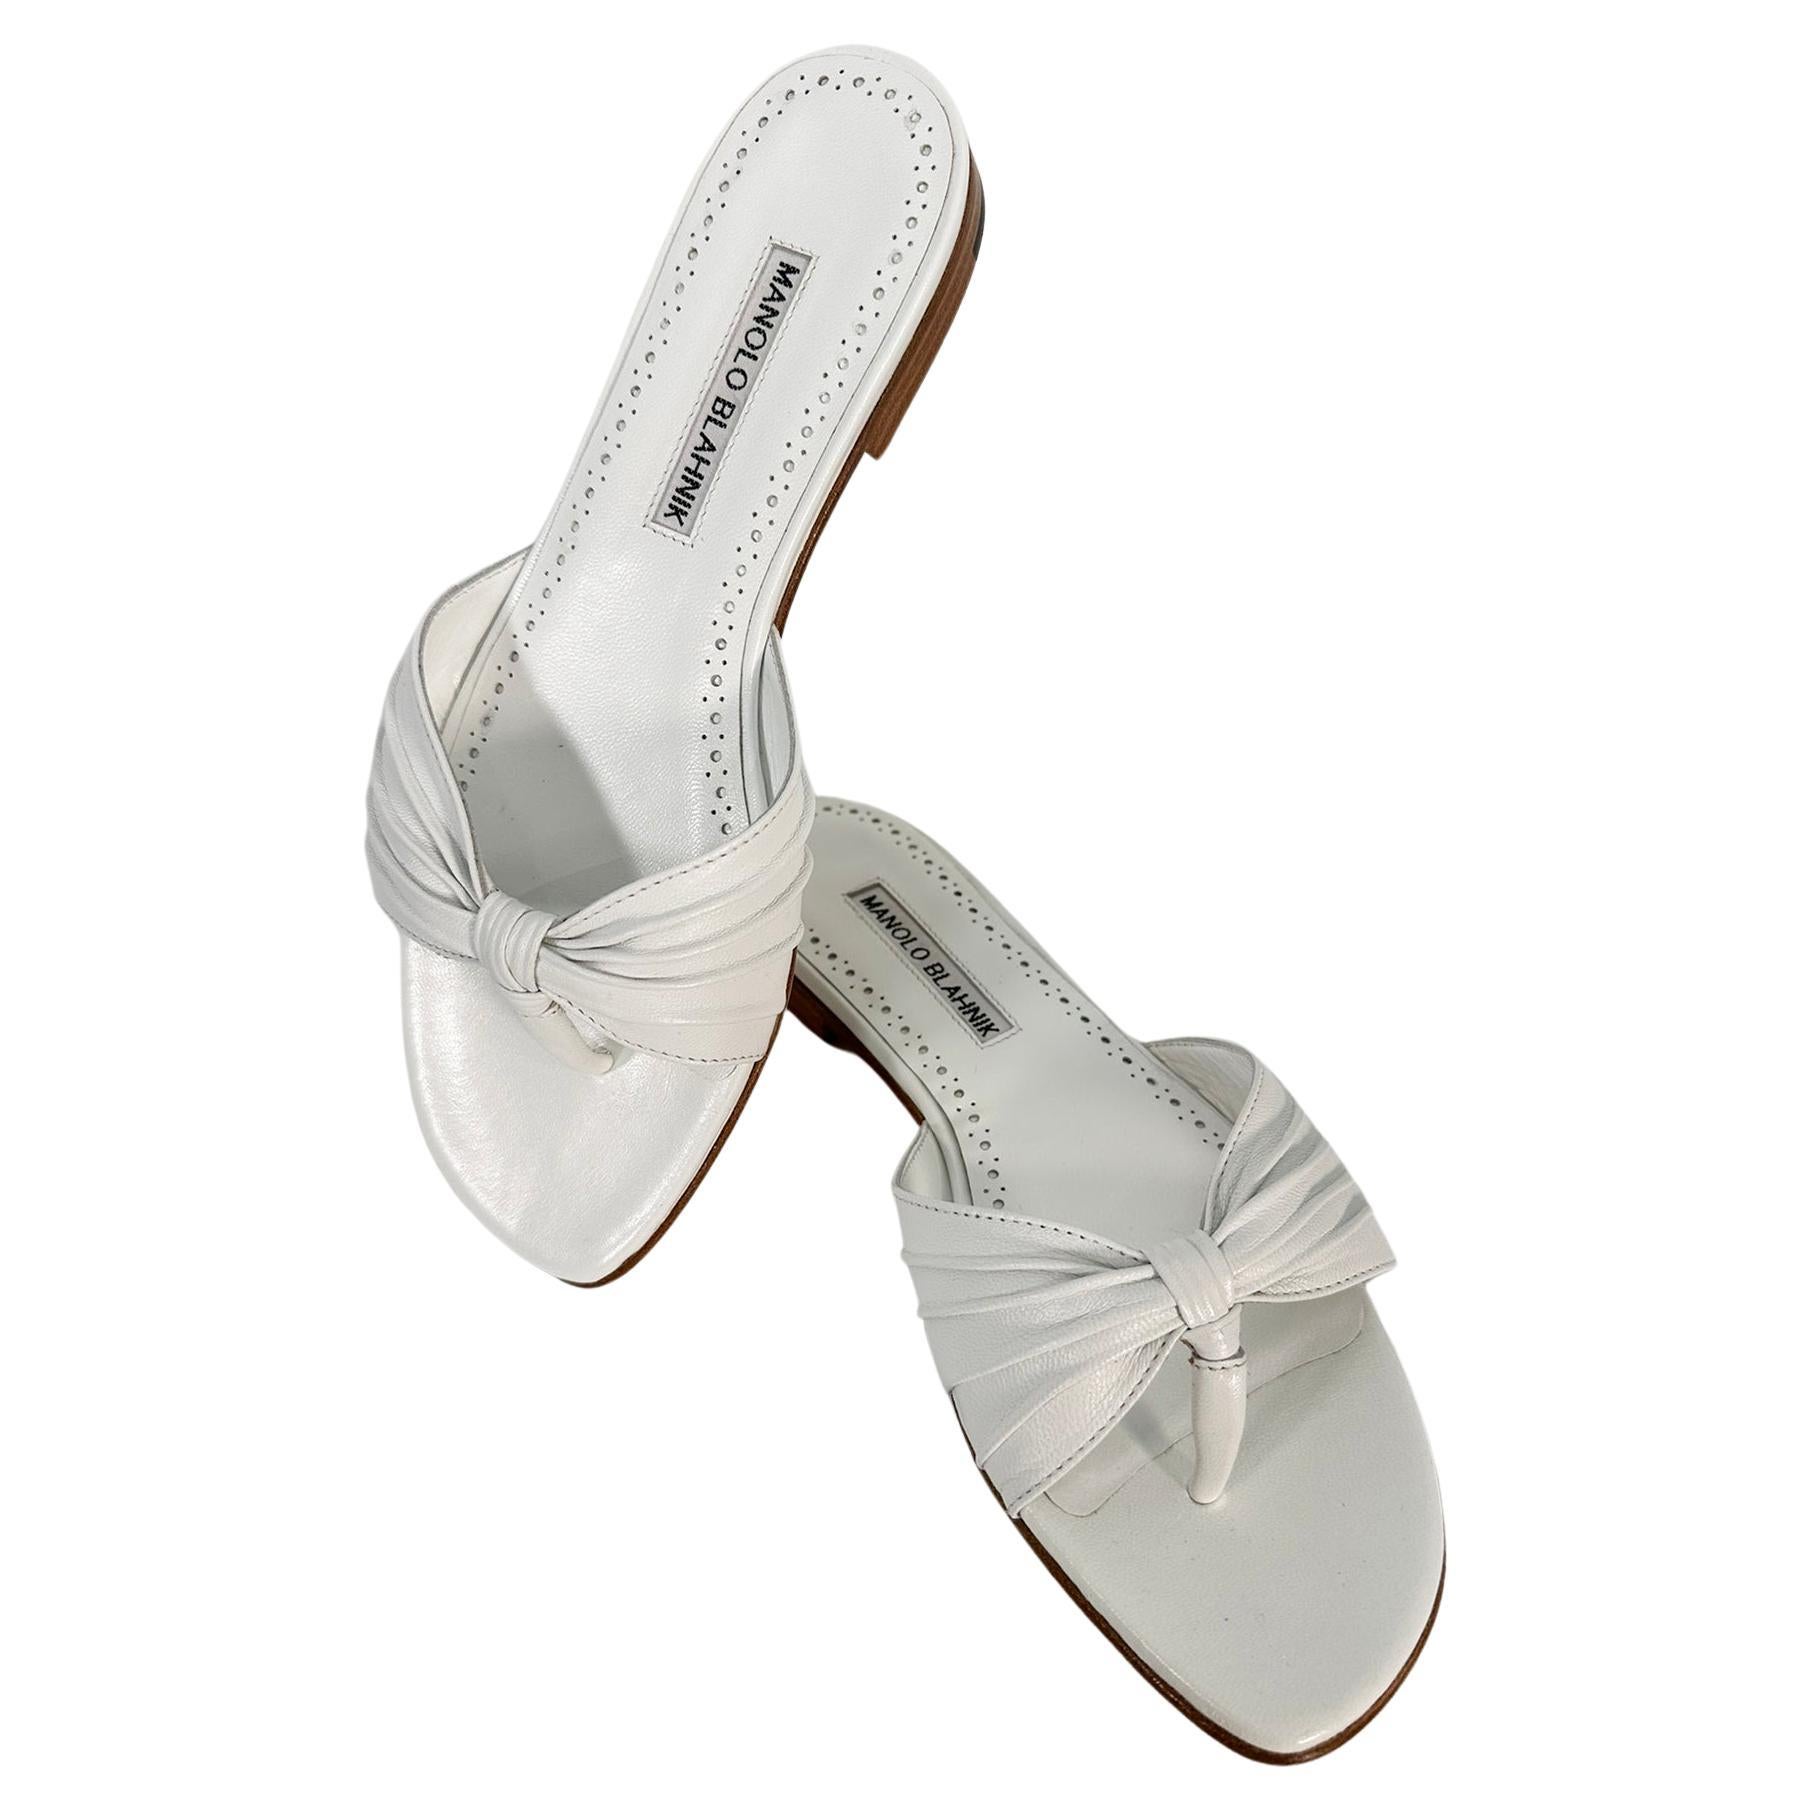 Manolo Blahnik White Leather Thong Sandals 37 Unworn with Box